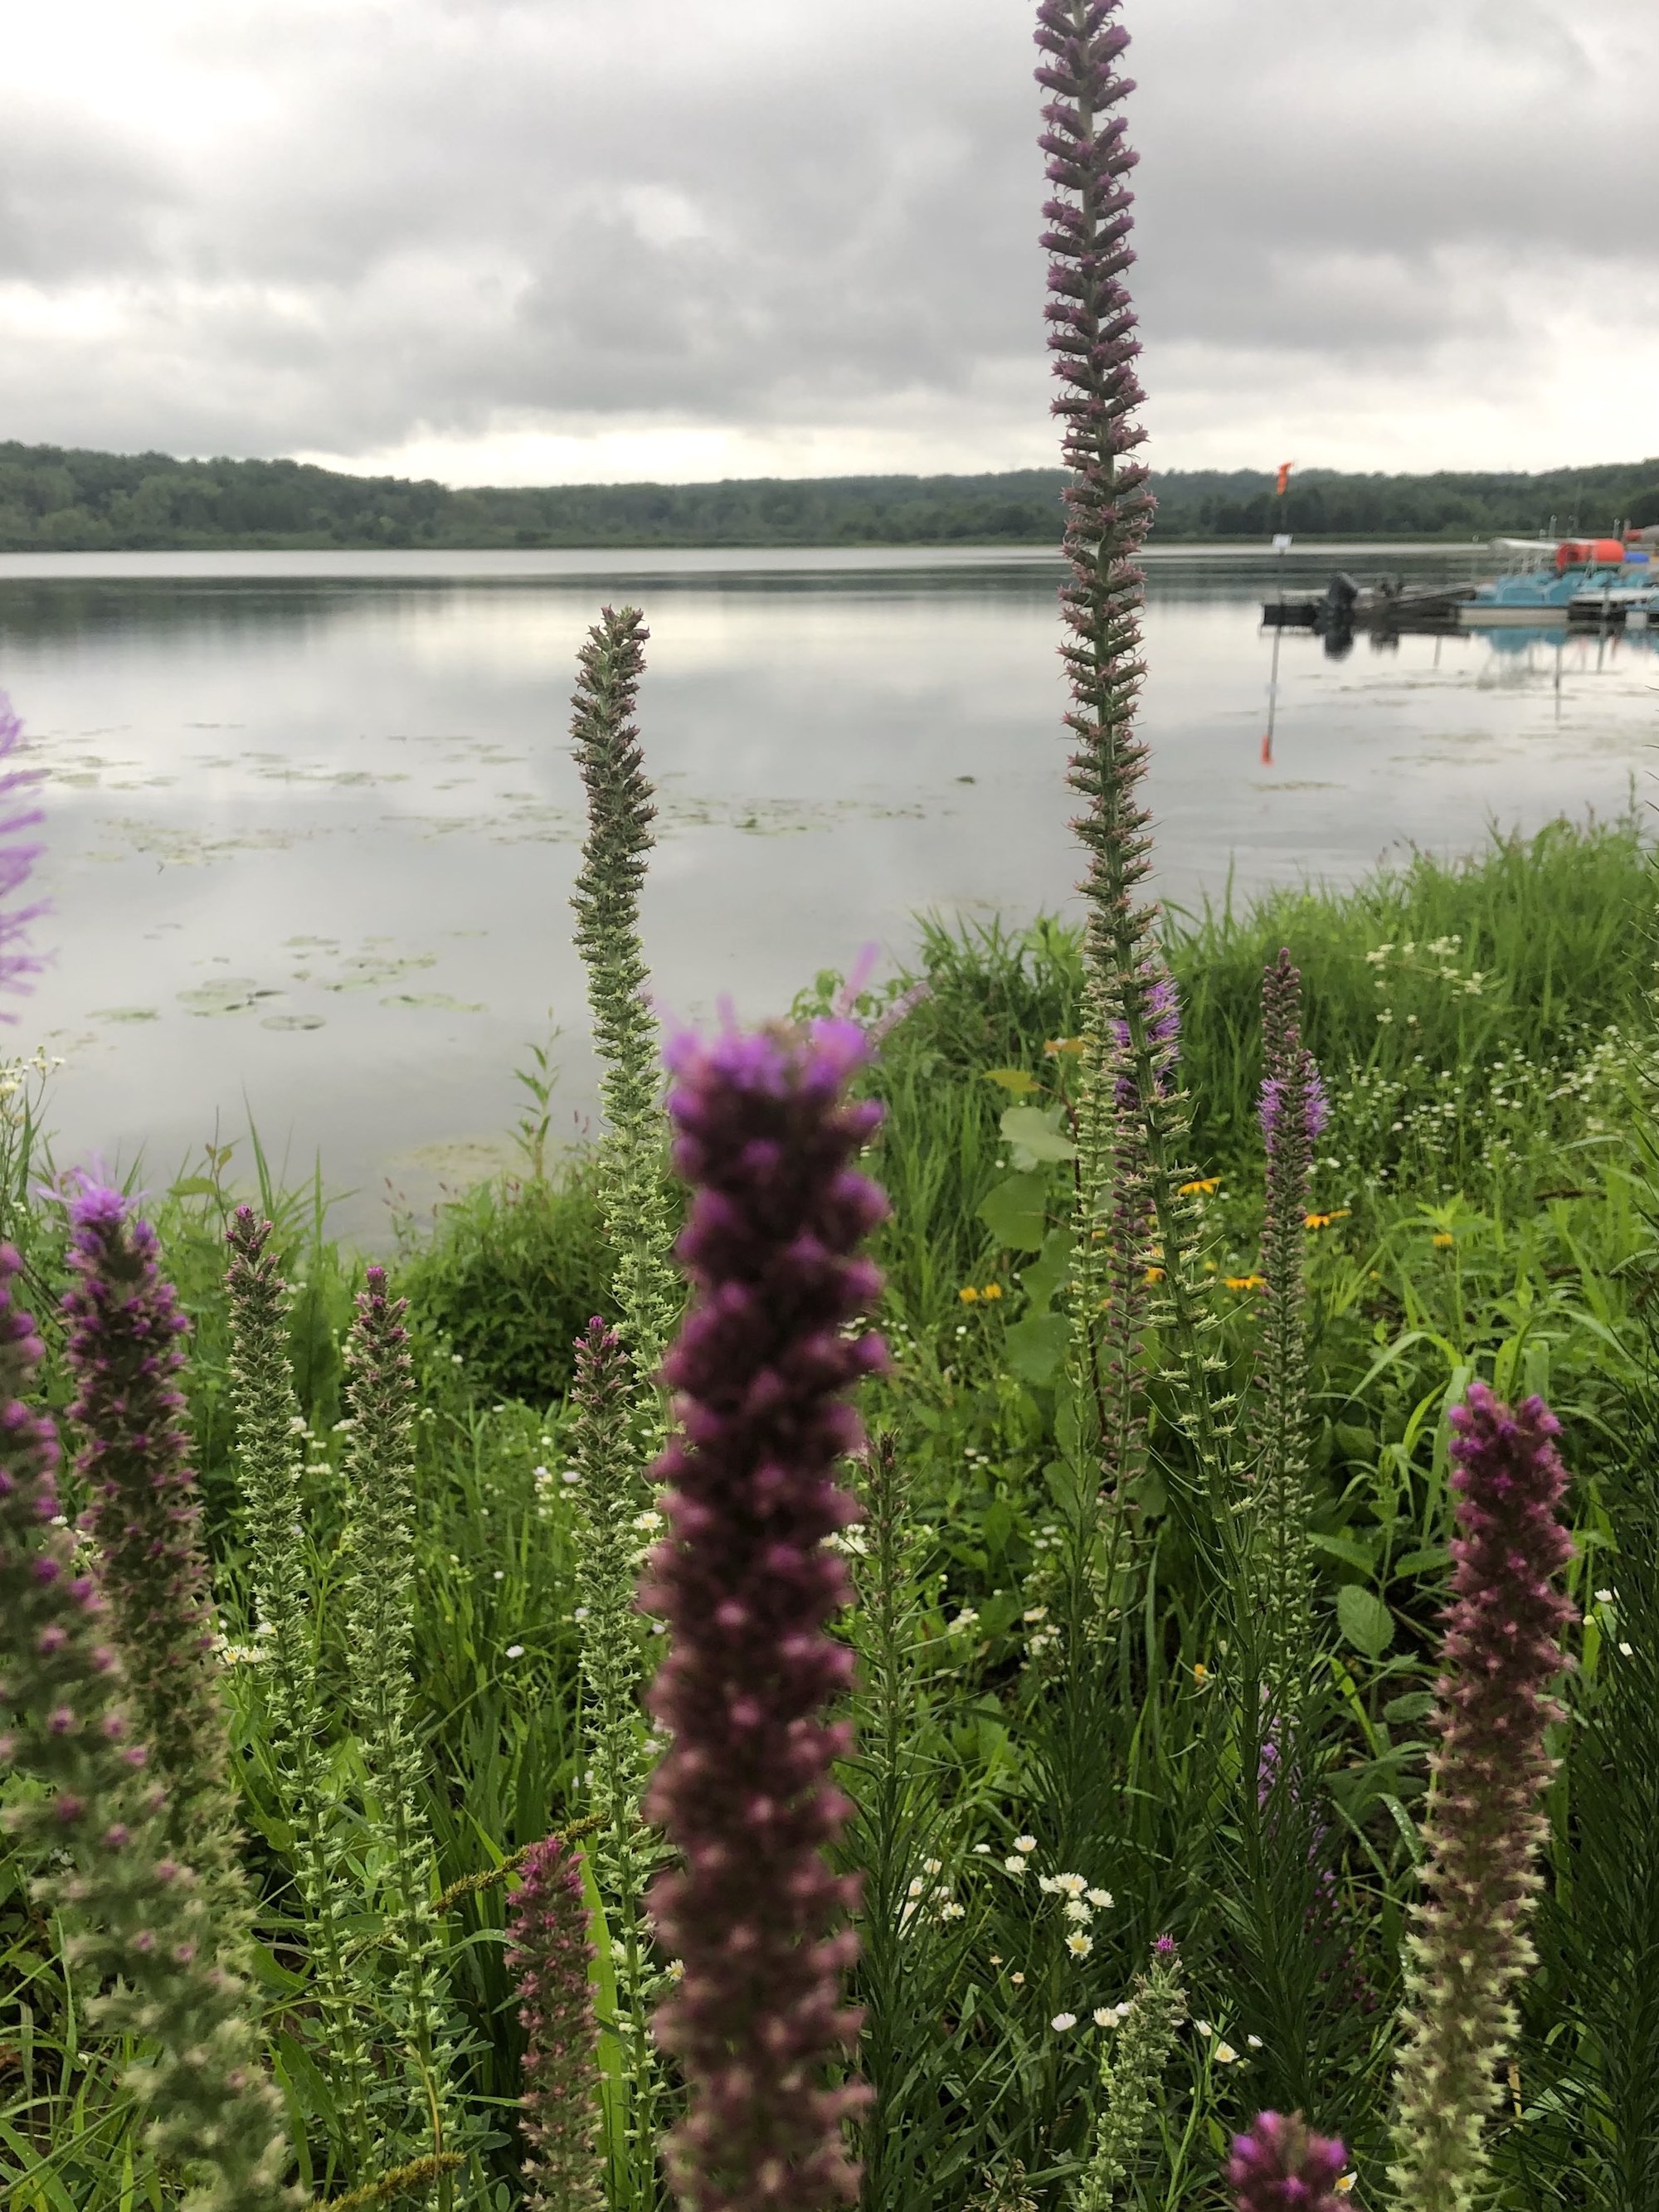 Prairie Blazing Star on the shore of Lake Wingra in Wingra Park in Madison, Wisconsin on July 15, 2021.